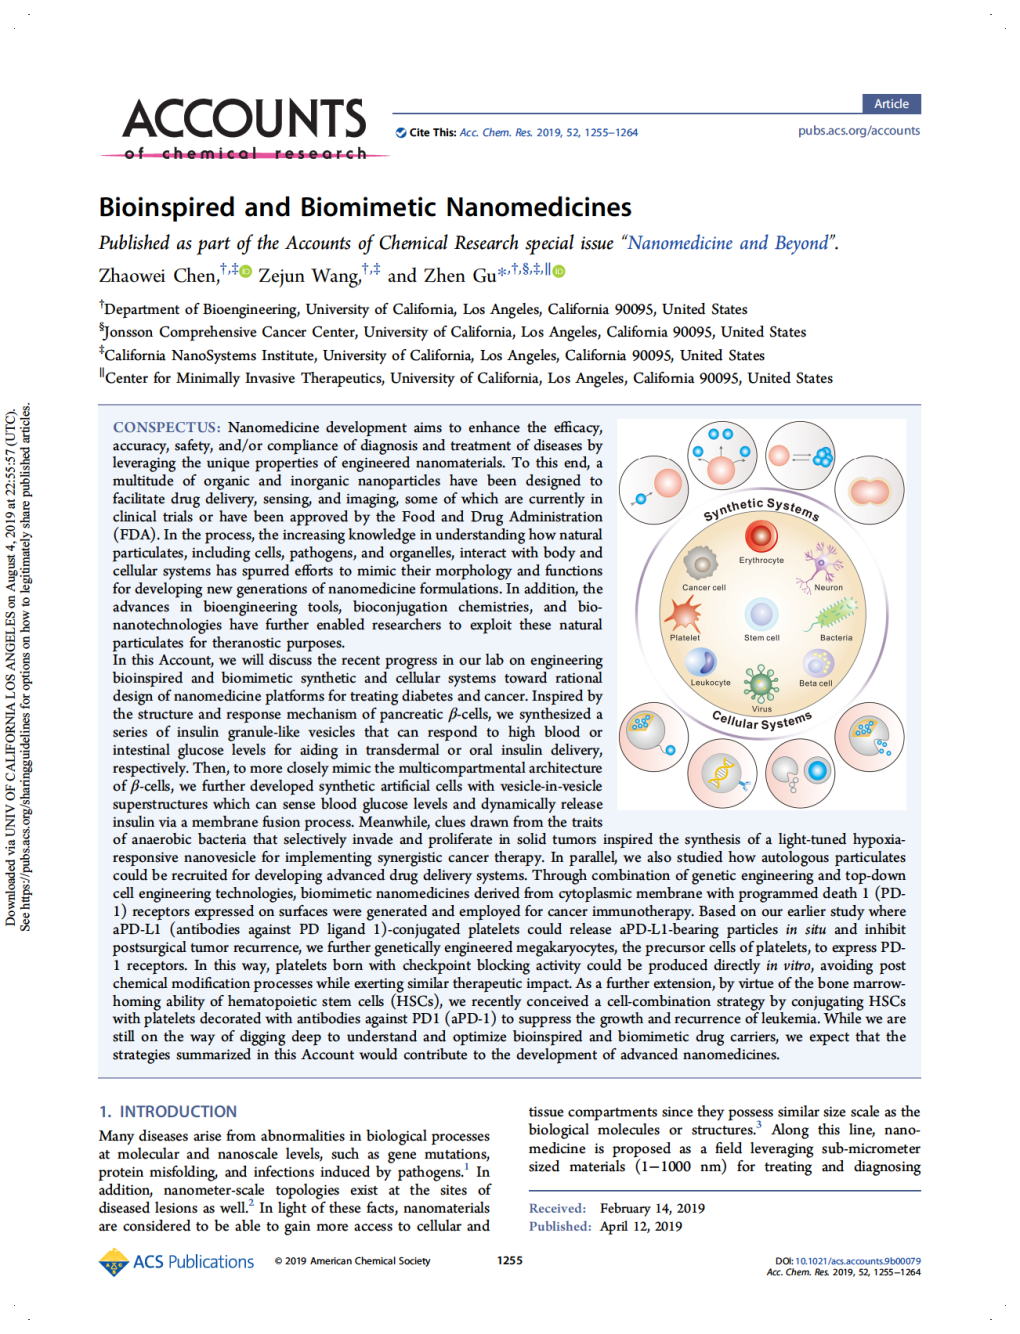 Bioinspired and Biomimetic Nanomedicines Published As Part of the Accounts of Chemical Research Special Issue“Nanomedicine and Beyond”